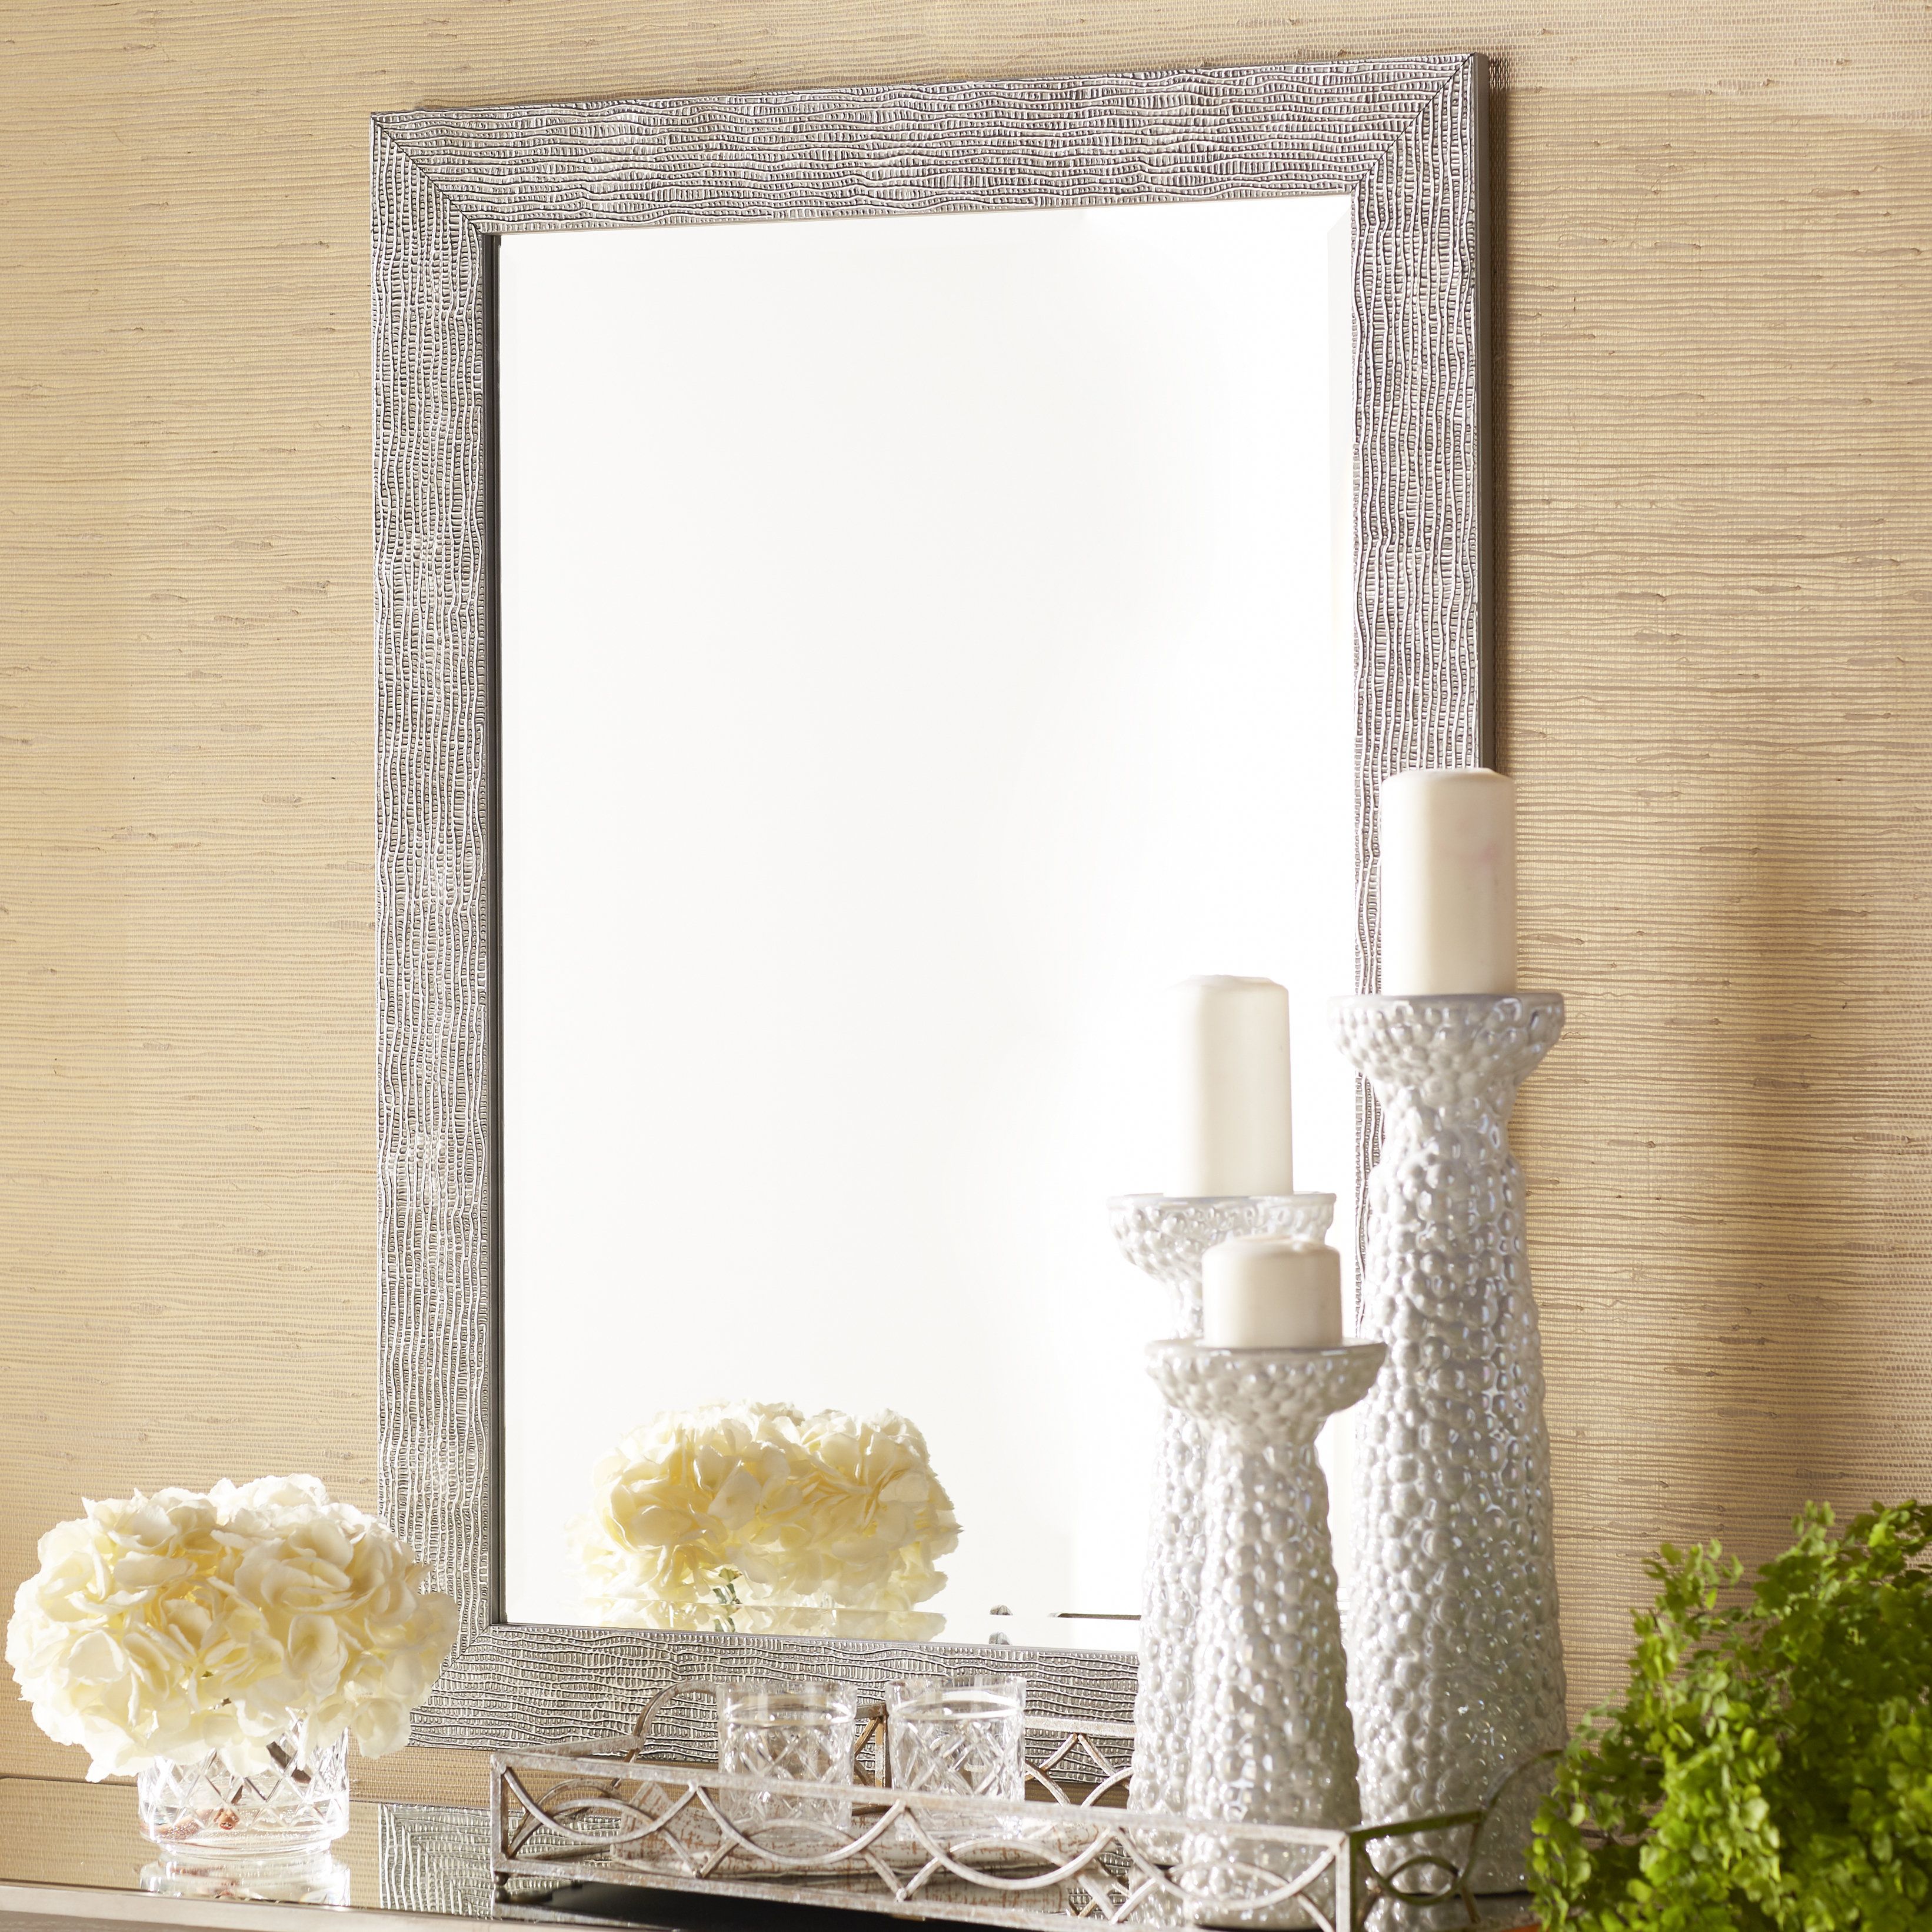 Farmhouse & Rustic World Menagerie Wall & Accent Mirrors Intended For Eriq Framed Wall Mirrors (View 8 of 20)